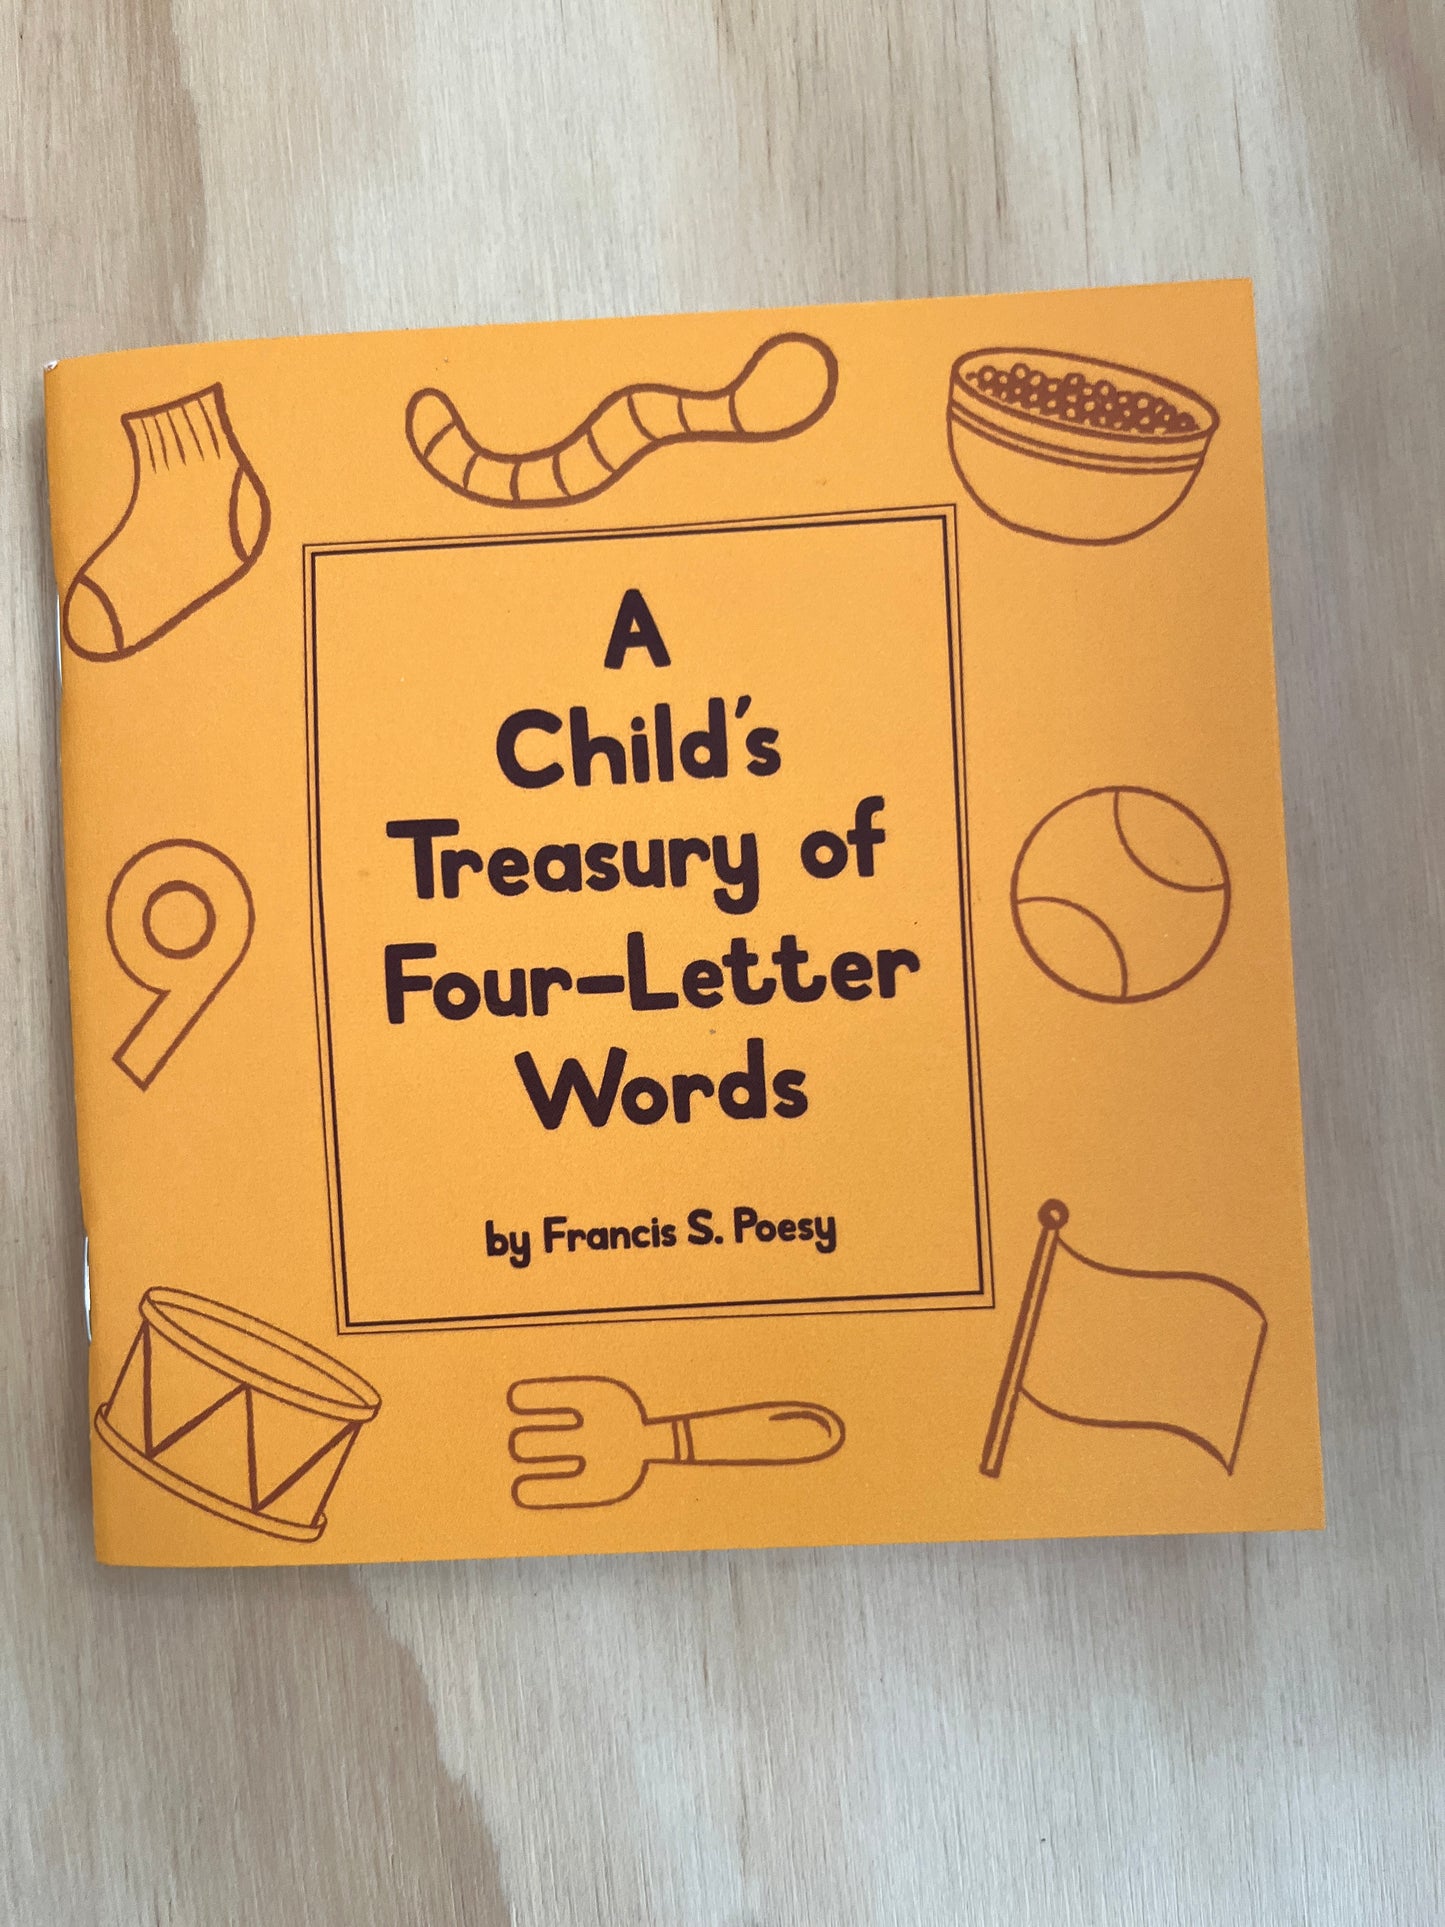 A Child's Treasury of Four-Letter Words